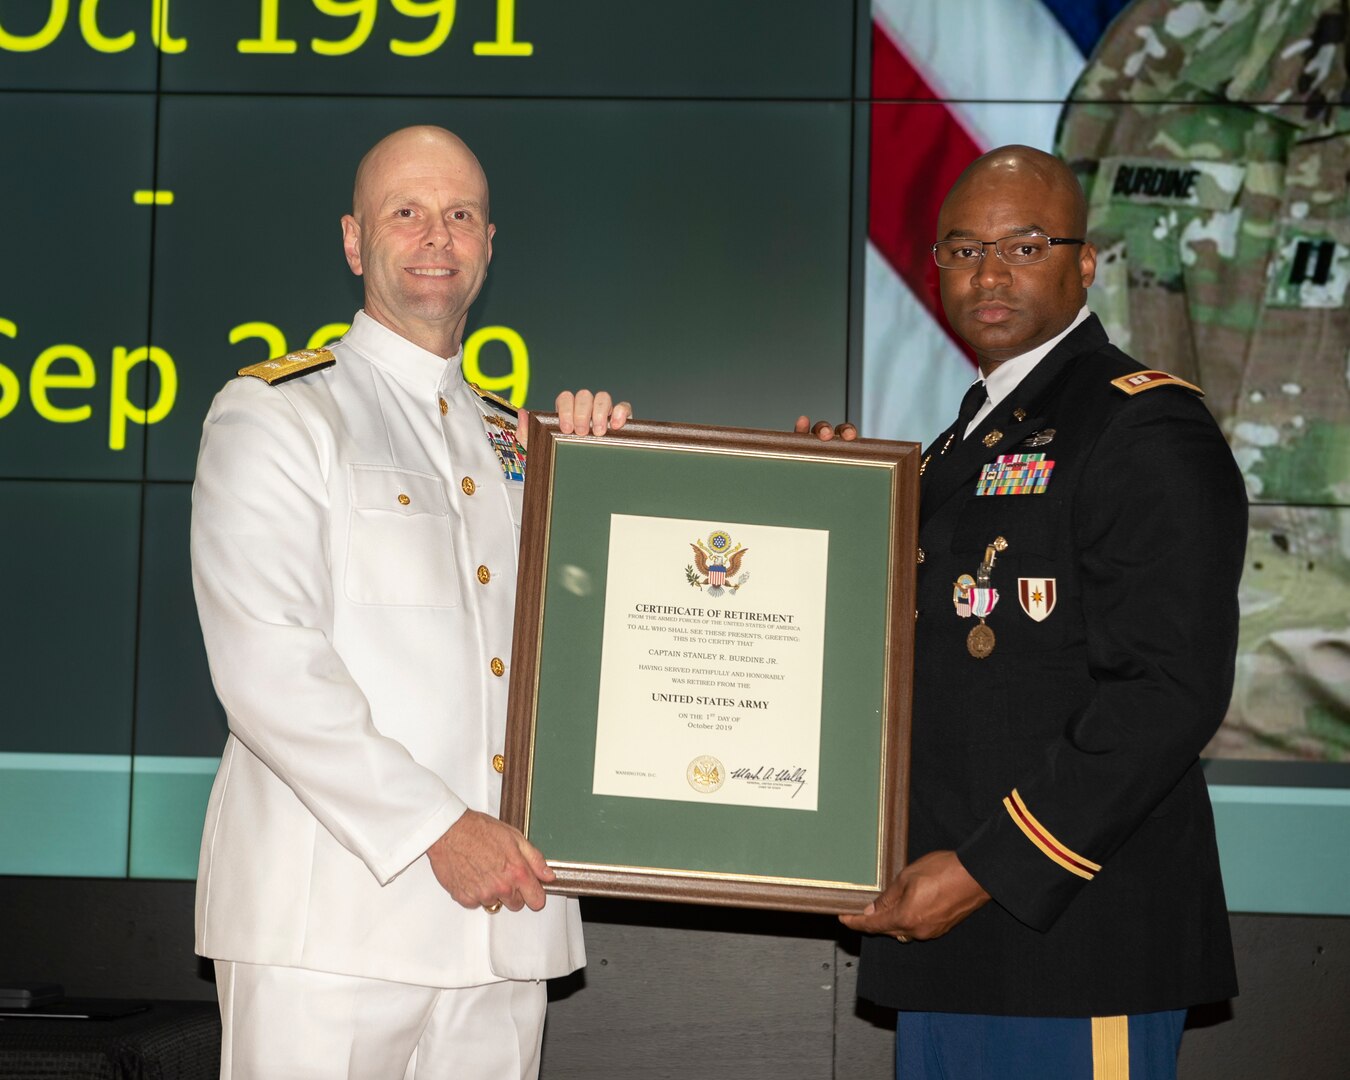 A Navy and Army officer stand on stage holding framed certificate